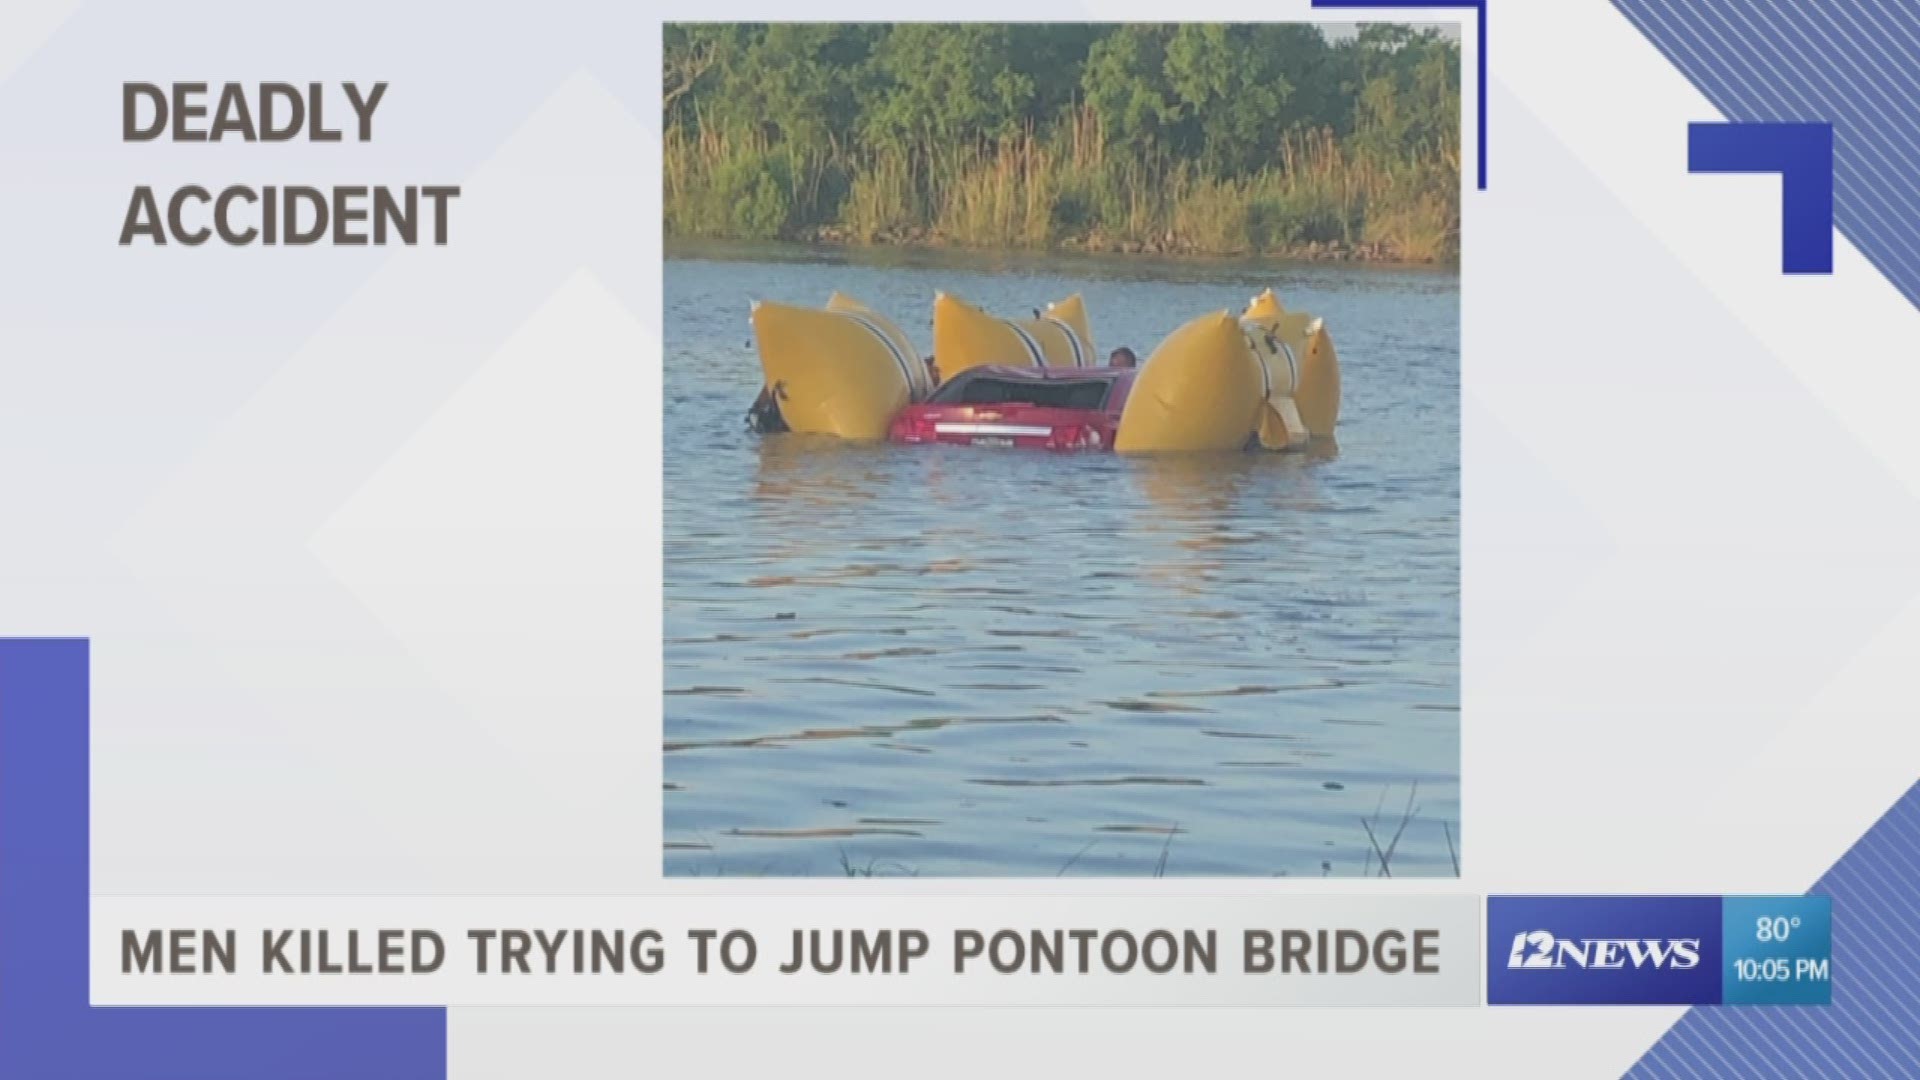 Here's a bizarre story from the Lake Charles area. A driver and passenger from the Rio Grande Valley lost their lives early Friday morning while trying to jump an open pontoon bridge. The bridge was closed to traffic to allow a boat to pass on the intracoastal waterway.